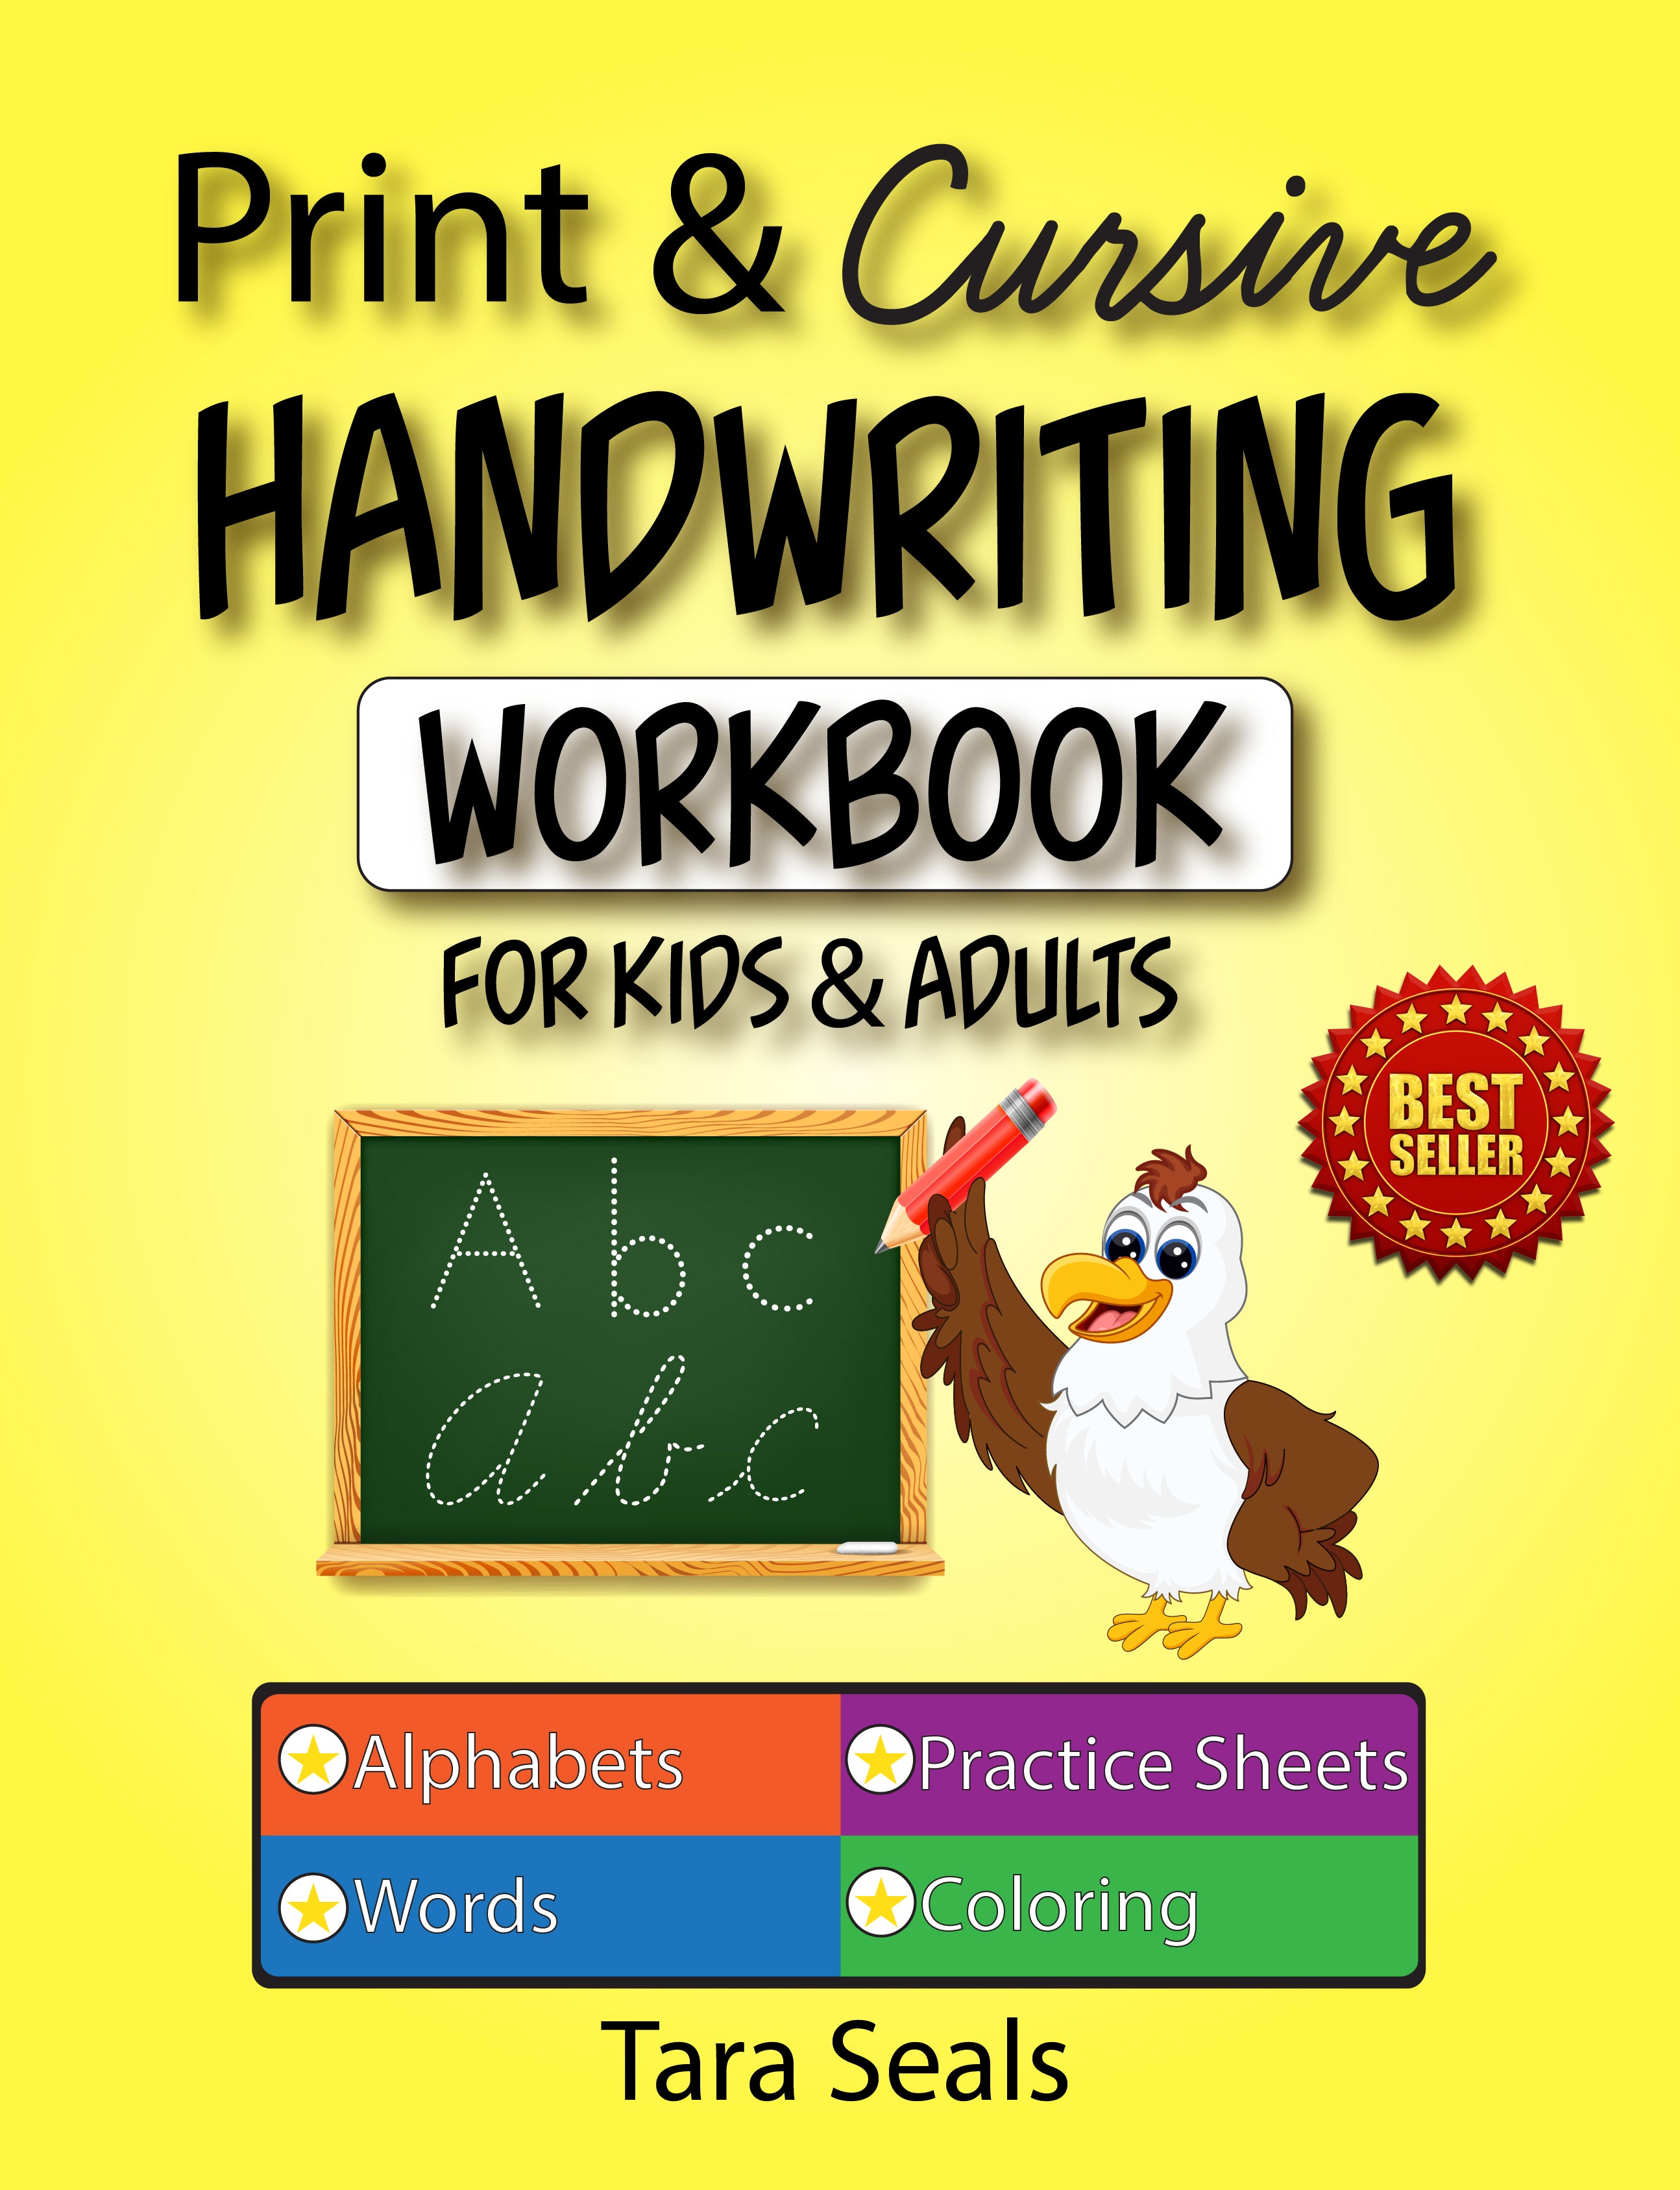 Stream ((Ebook)) 📖 Cursive Handwriting Workbook for Adults - 200+ Pages of  Handwriting Practice for Adult by KelsieAileen